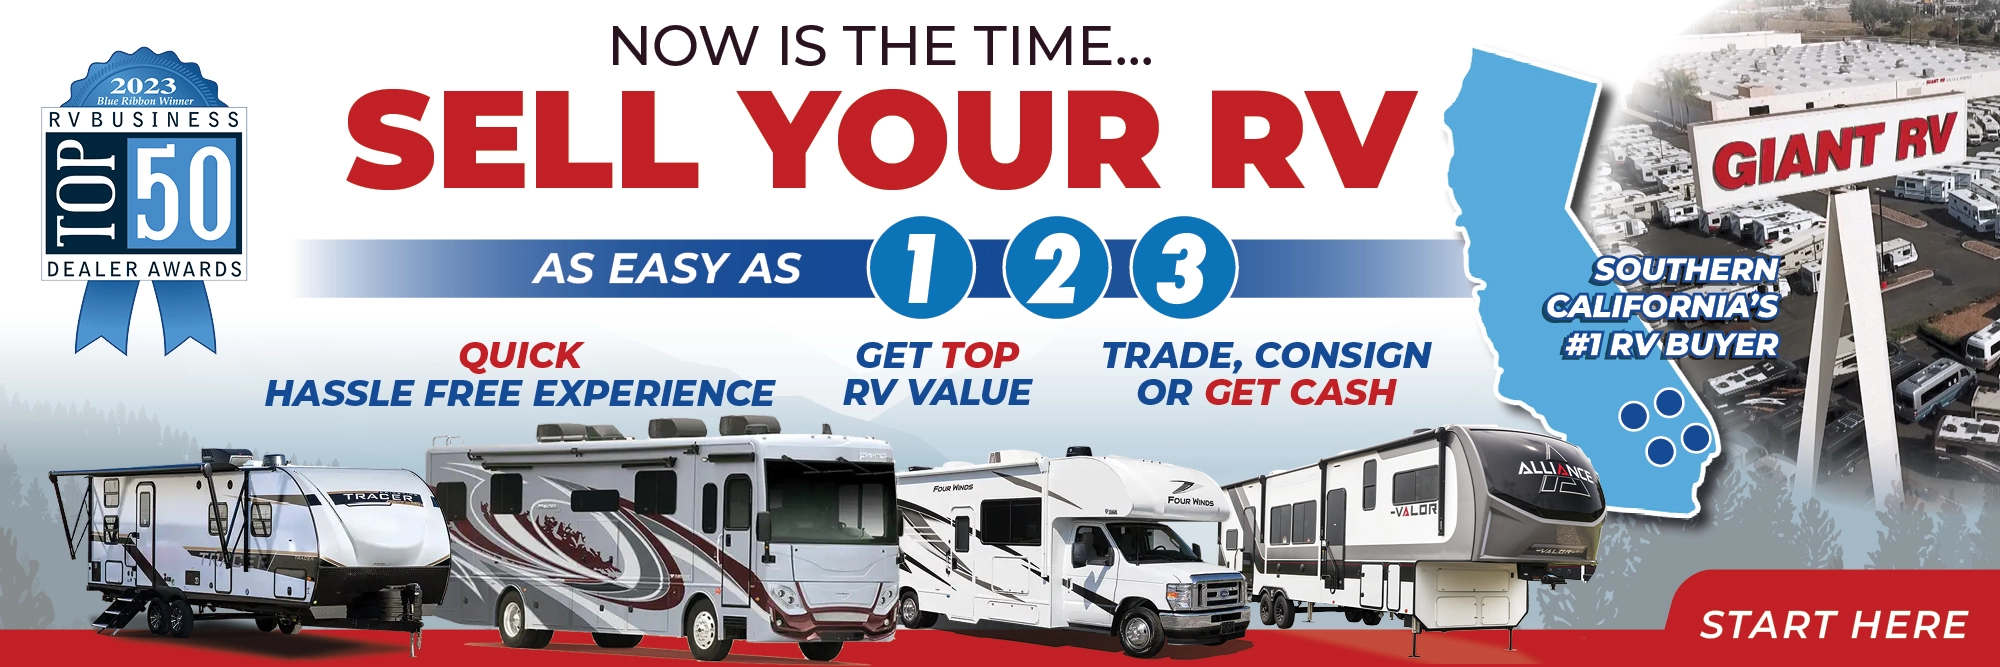 Sell us your RV desktop